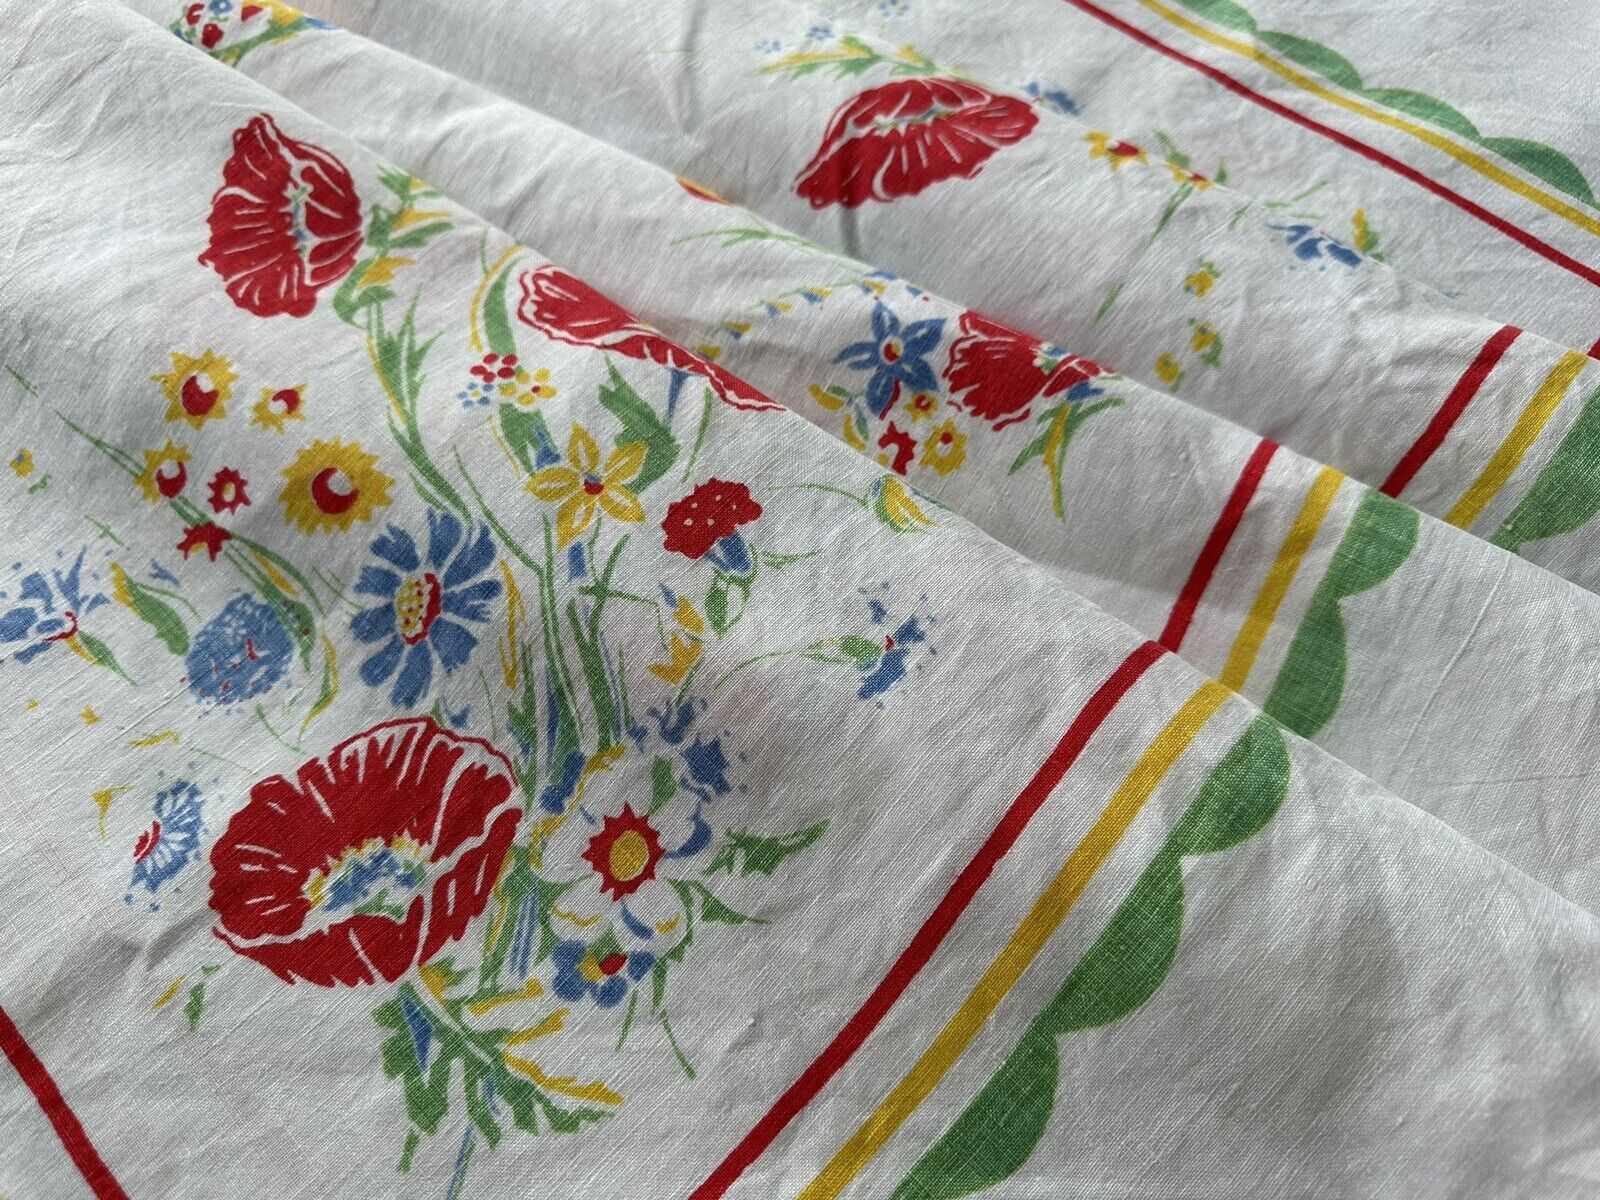 Vintage Bright Print White Linen Tablecloth 54X51 Red Poppies Blue Yellow Green